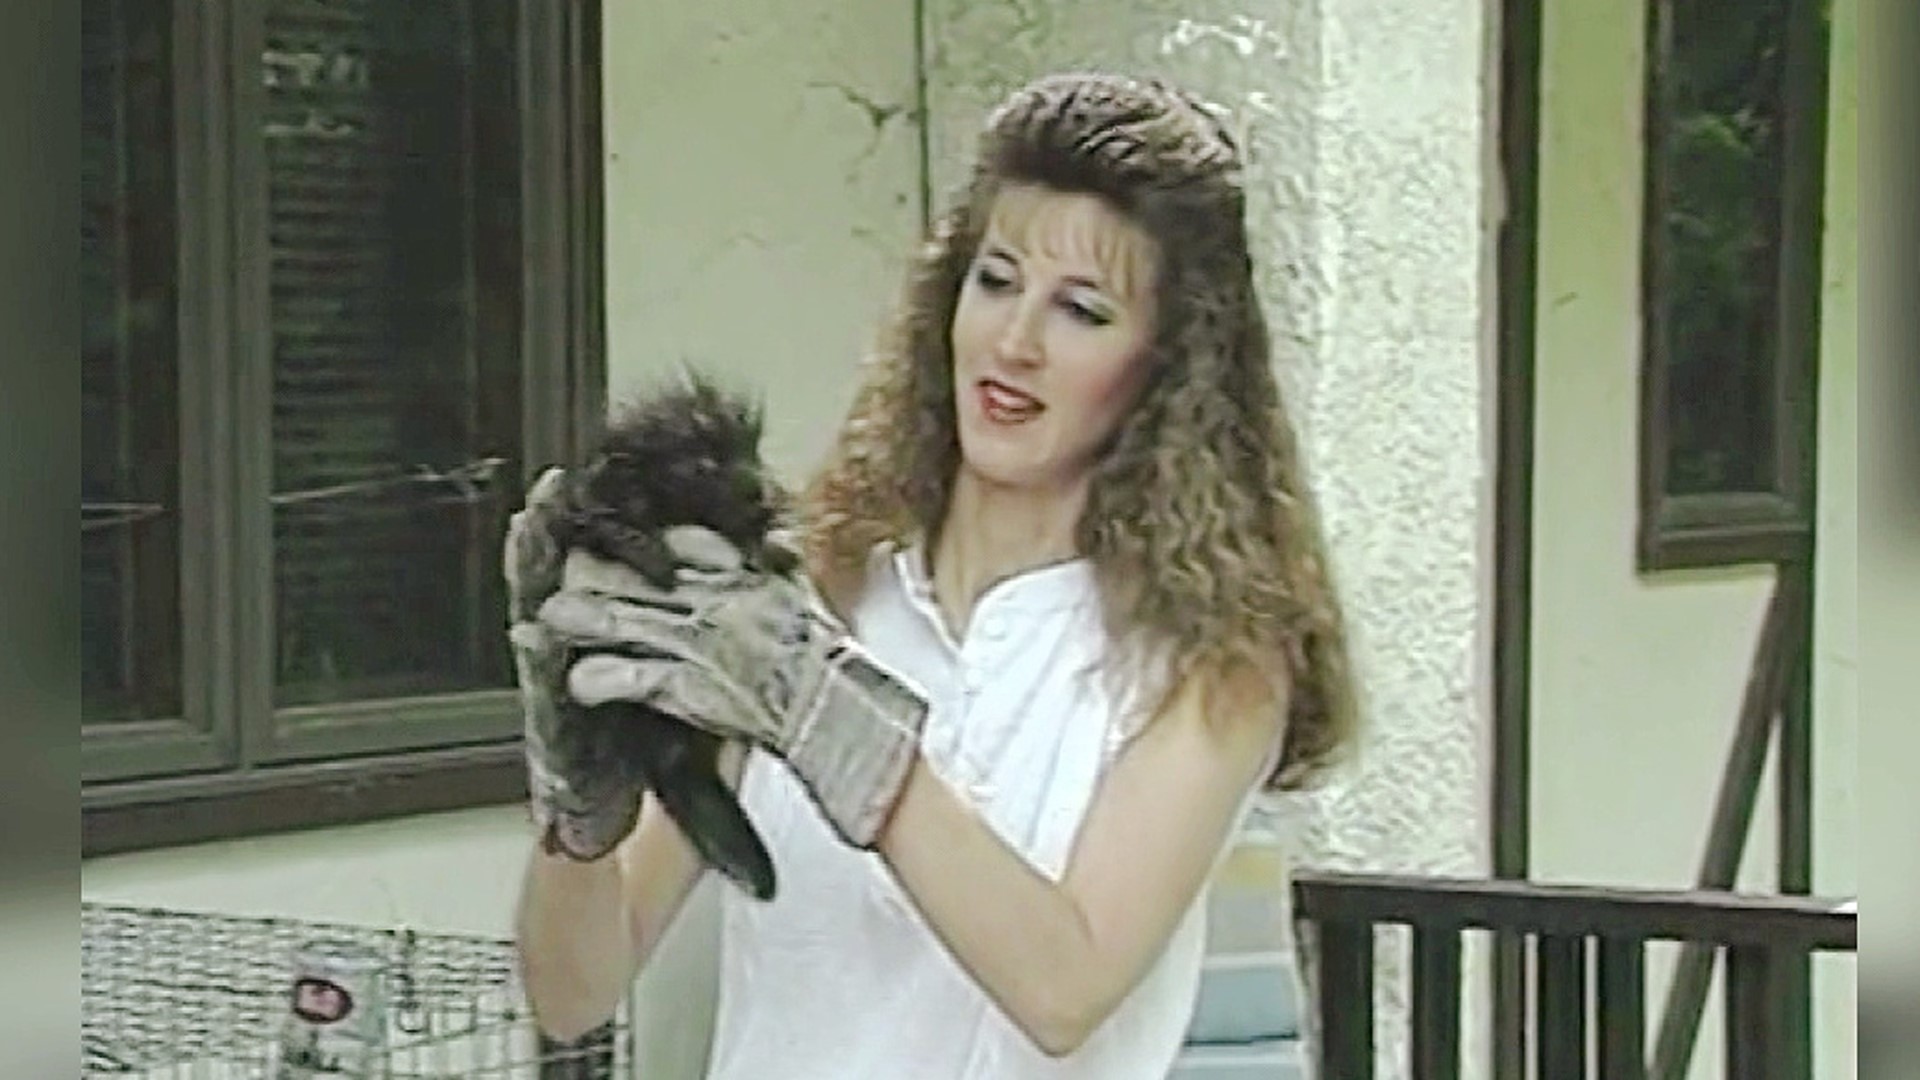 Mike Stevens takes us back to 1991, to a fledgling animal rehab center.